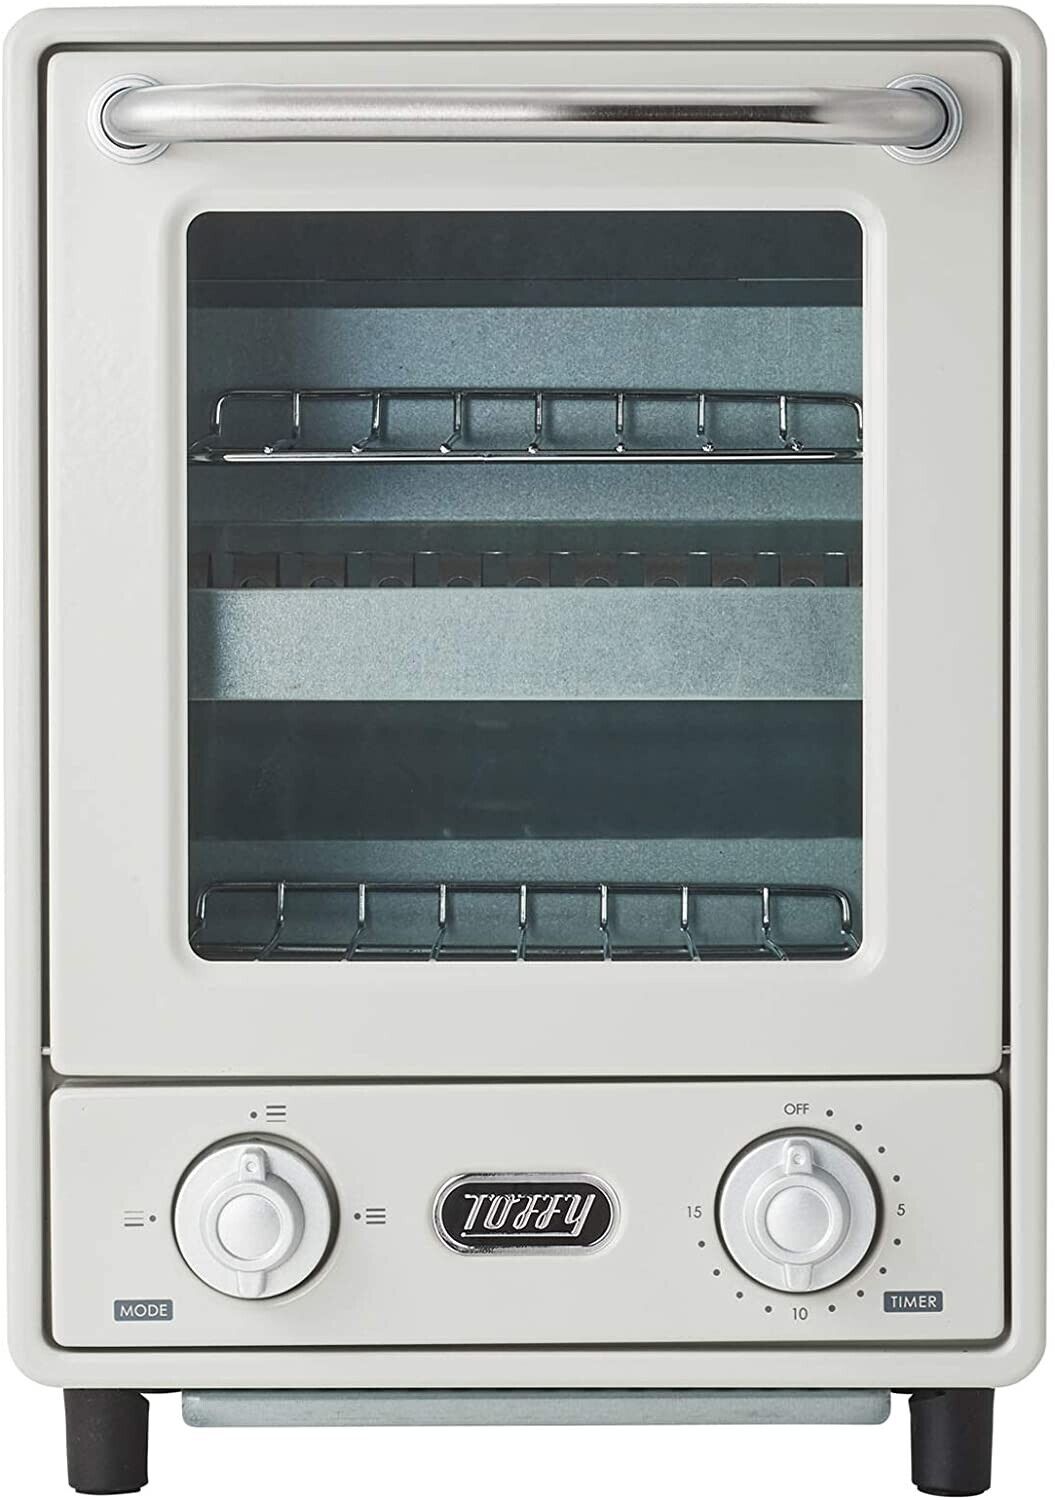 K-TS4-AW Toffy Oven Toaster ash white 2-Stage Toaster Slim K-TS4-AW AC100V NEW